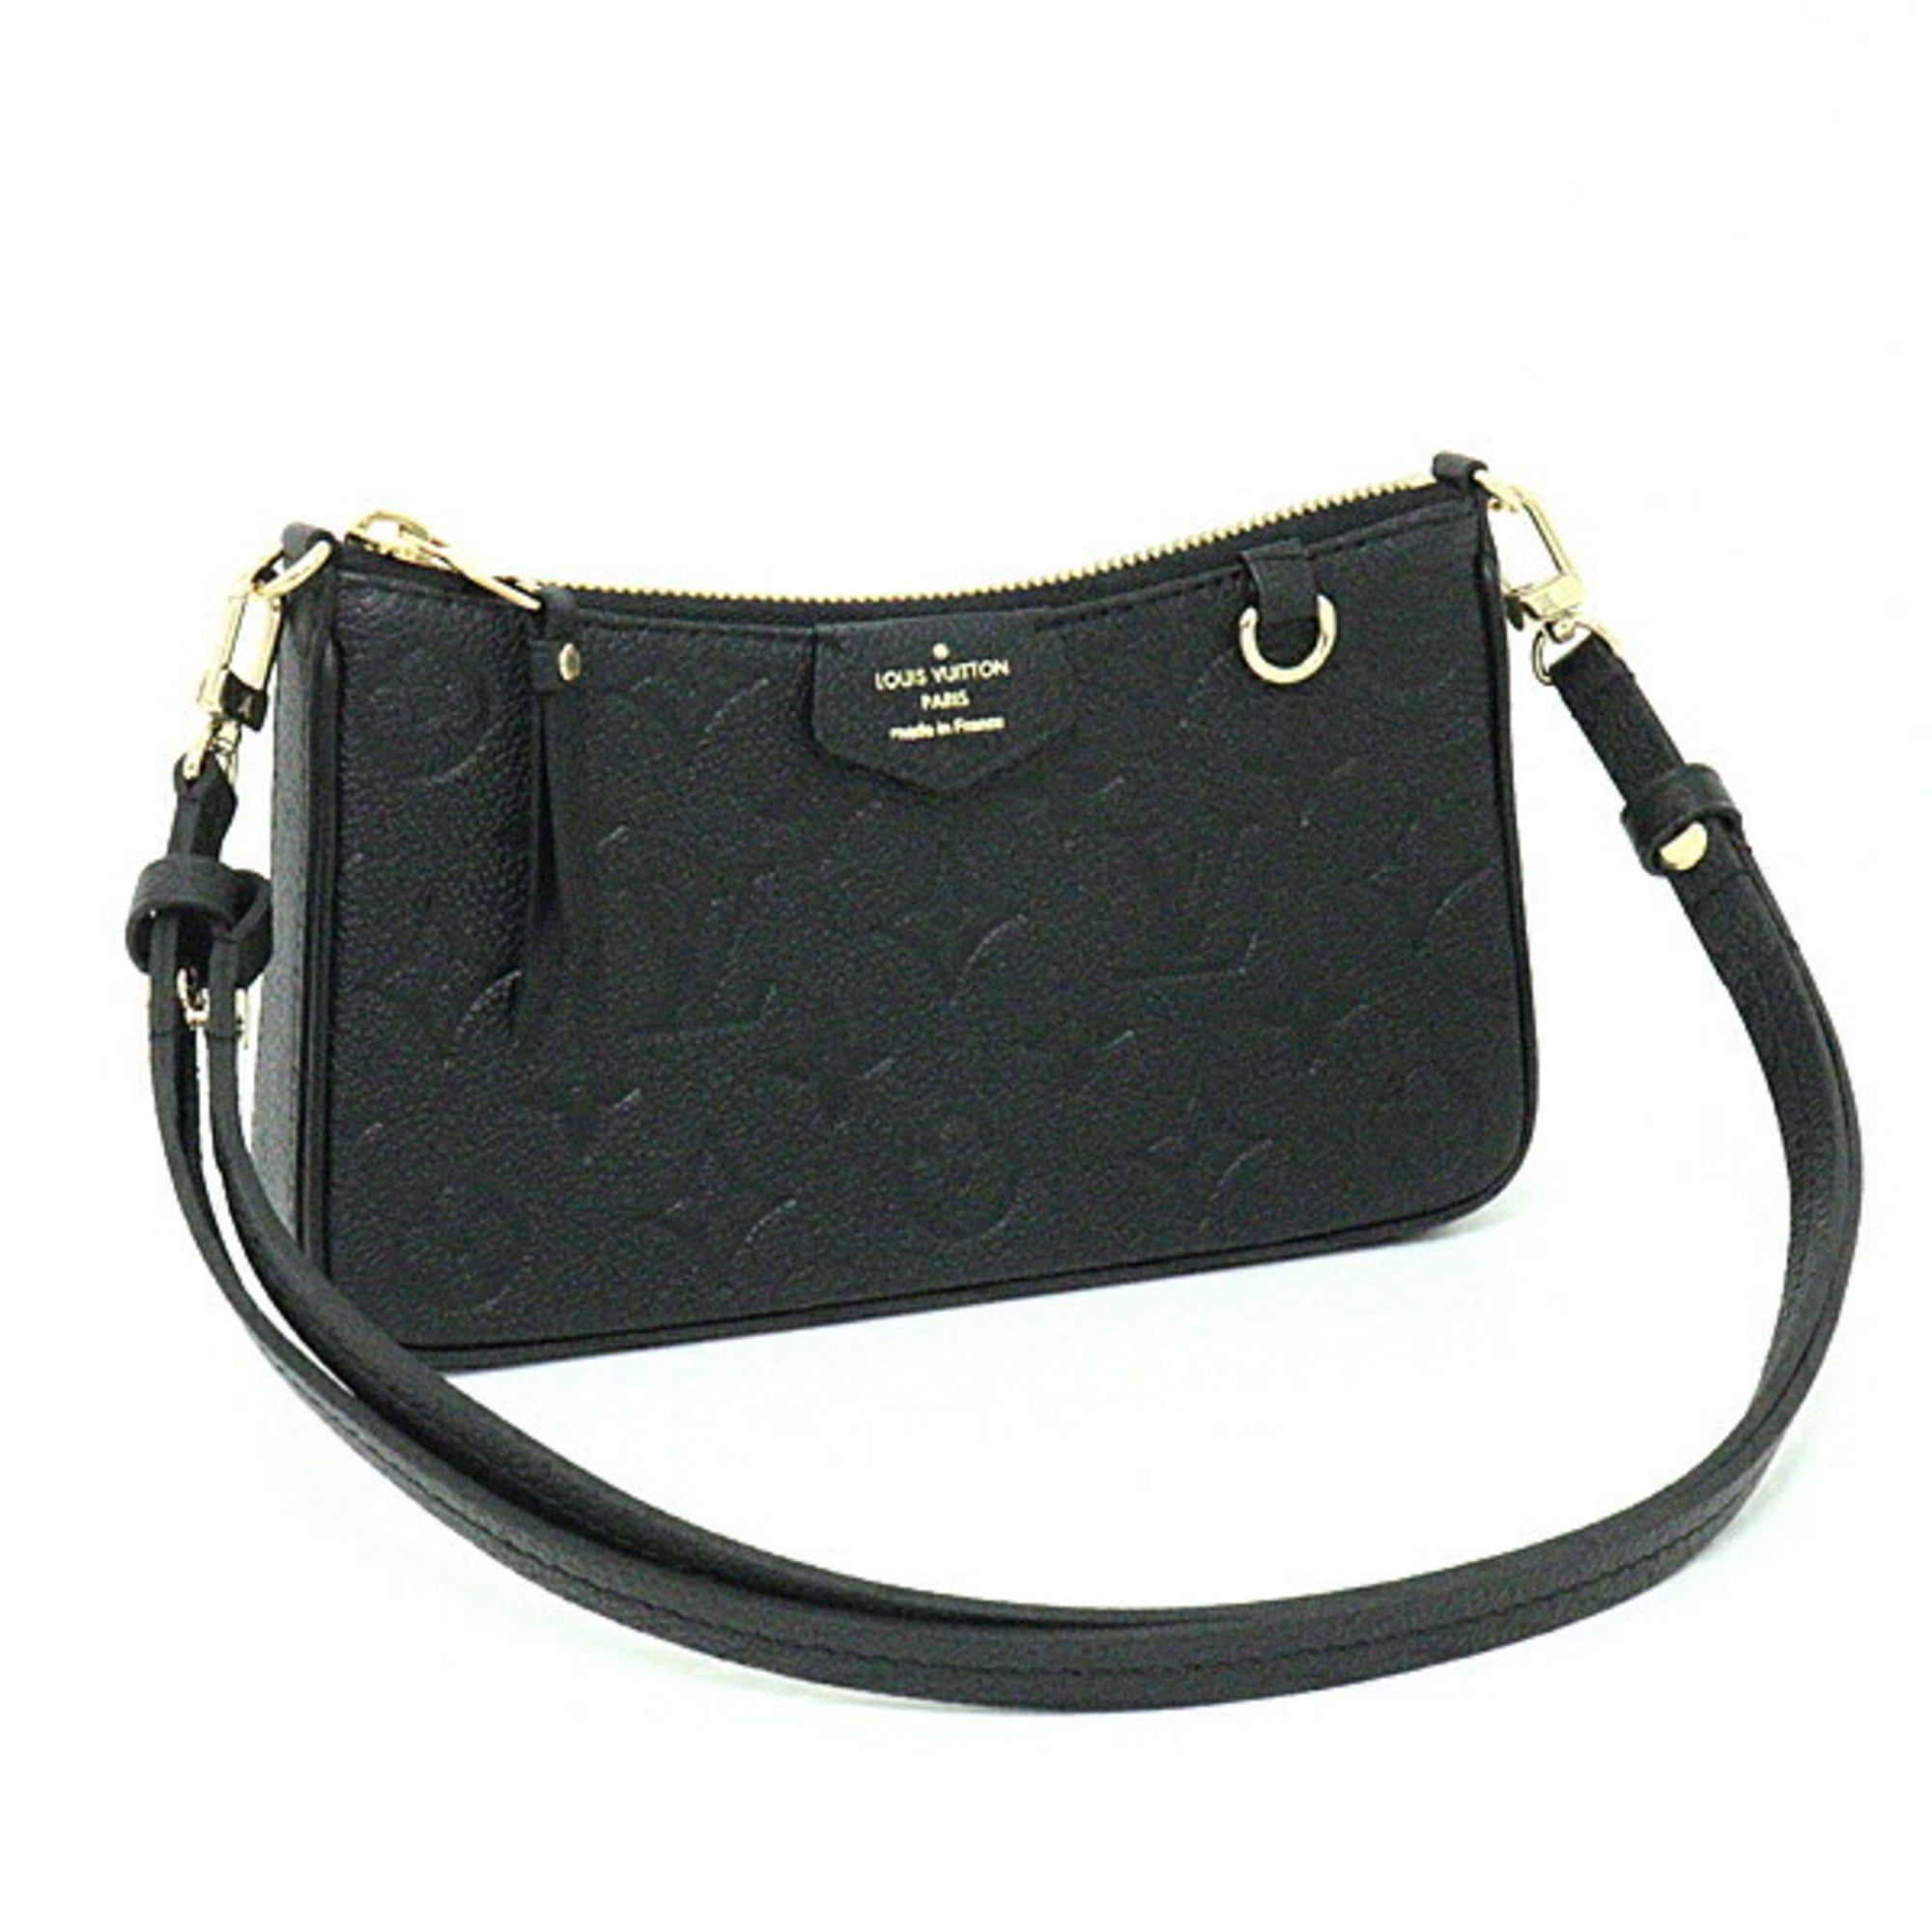 Easy Pouch Monogram Empreinte Leather - Women - Small Leather Goods